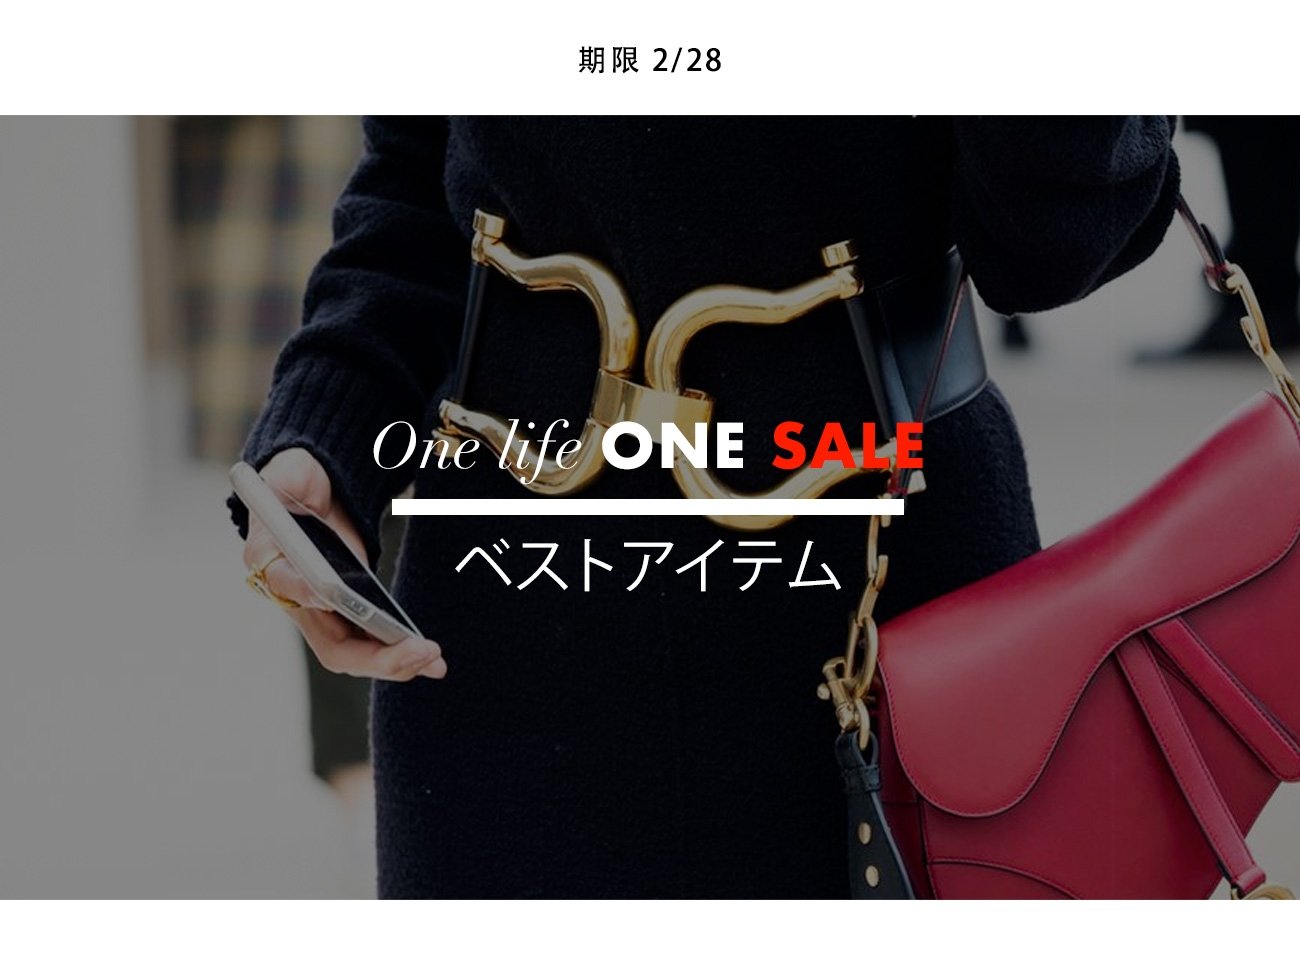 BEST OF ONE LIFE ONE SALE